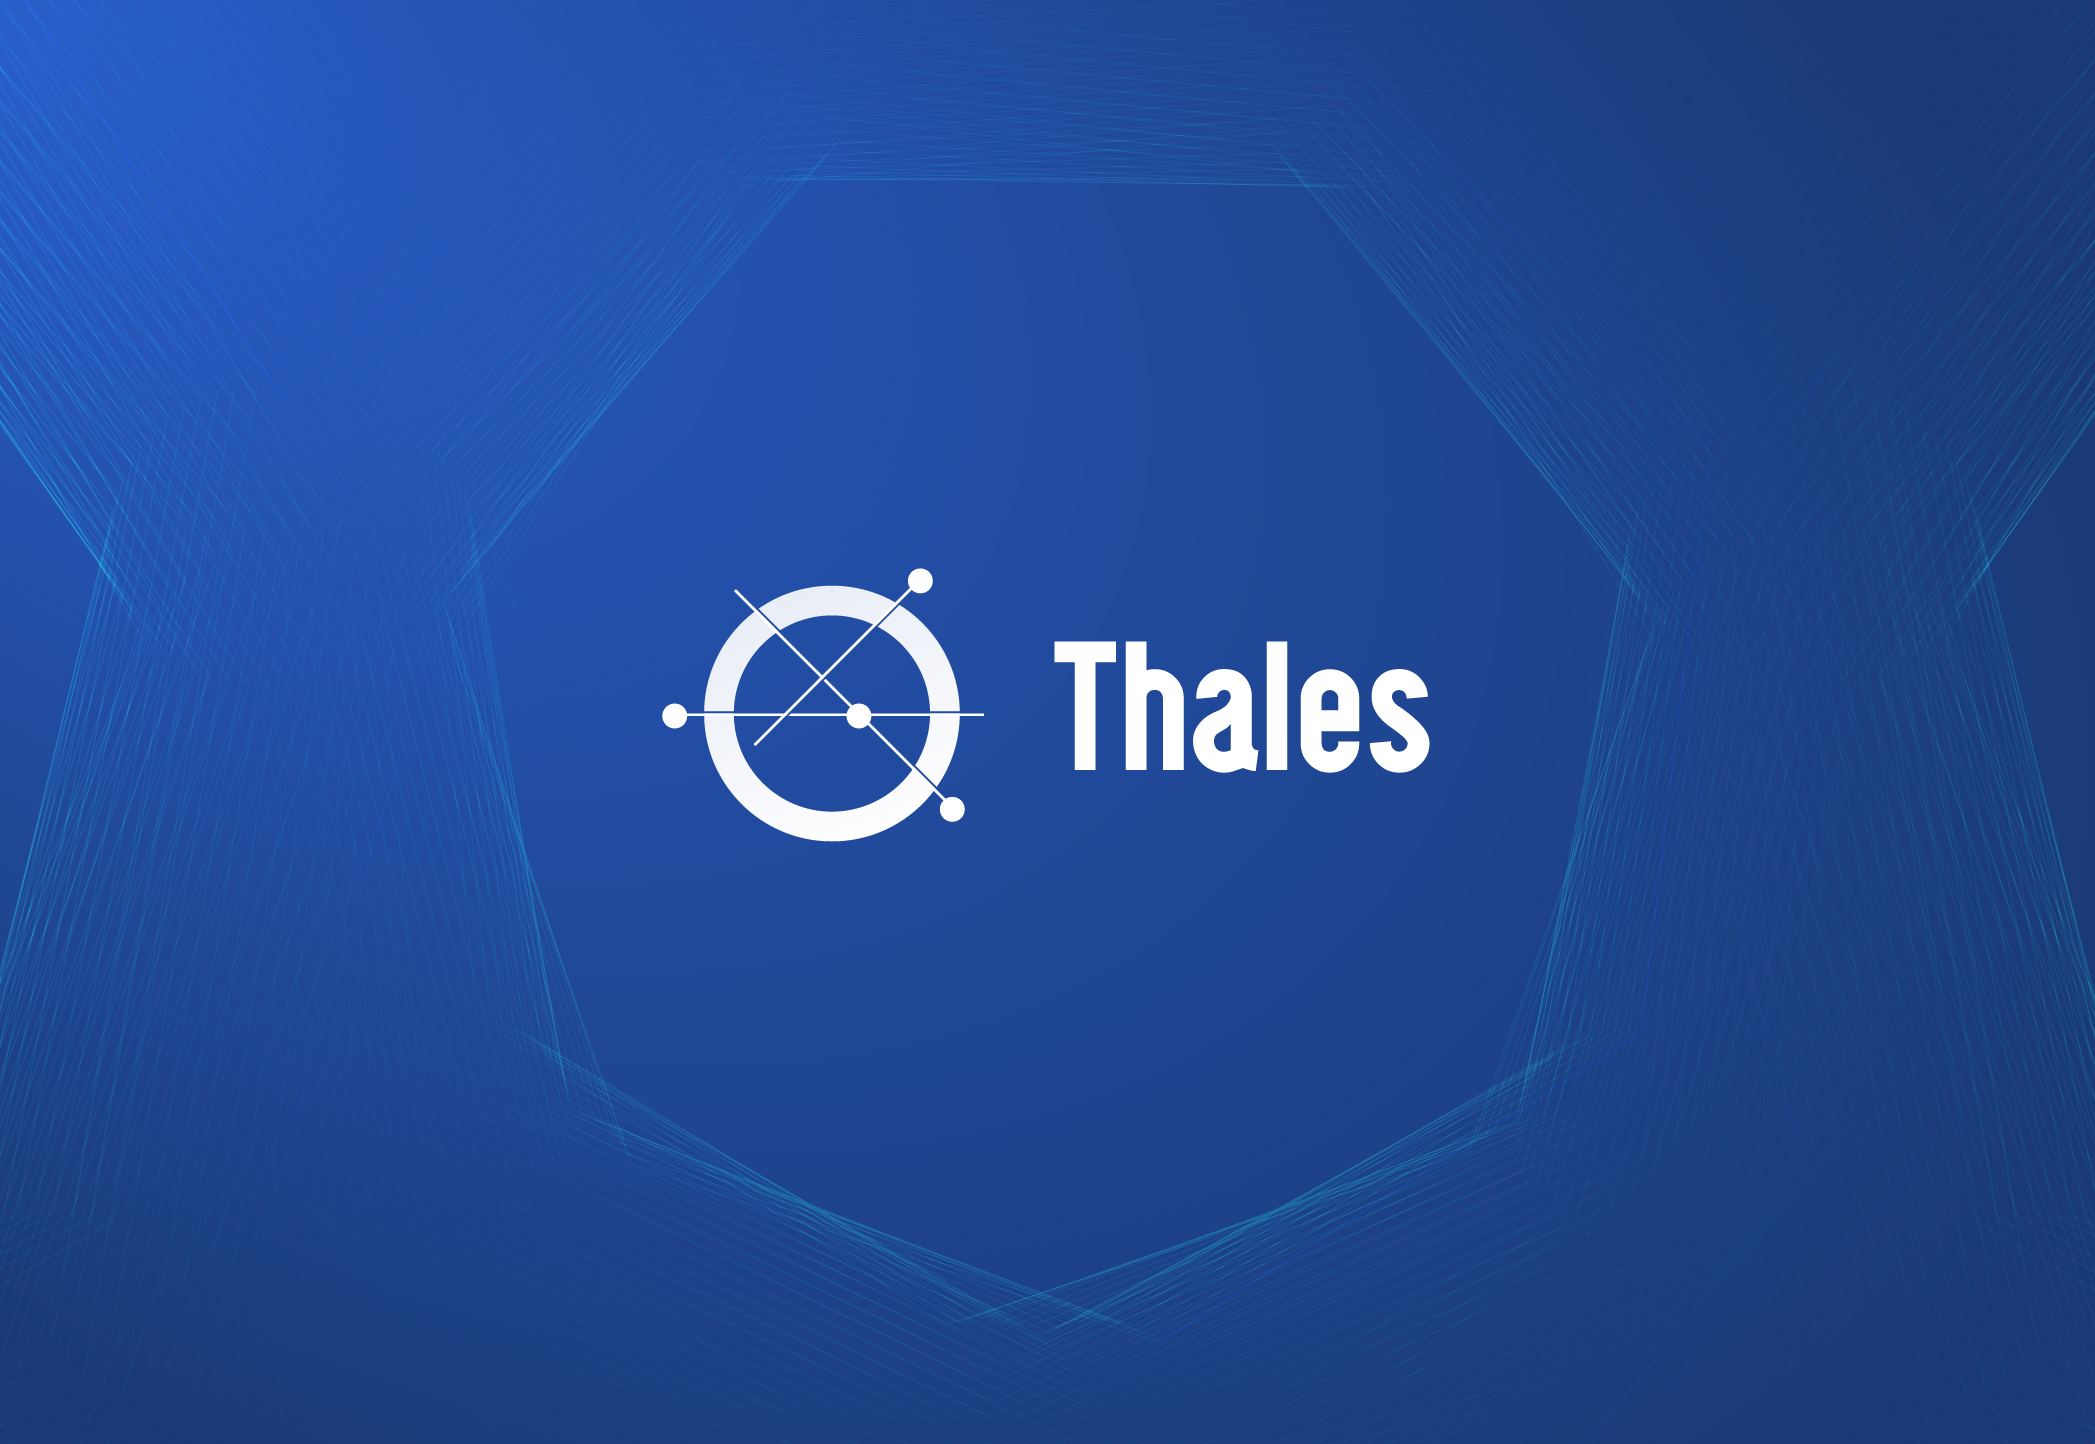 Thales: We're building a whole new economic system